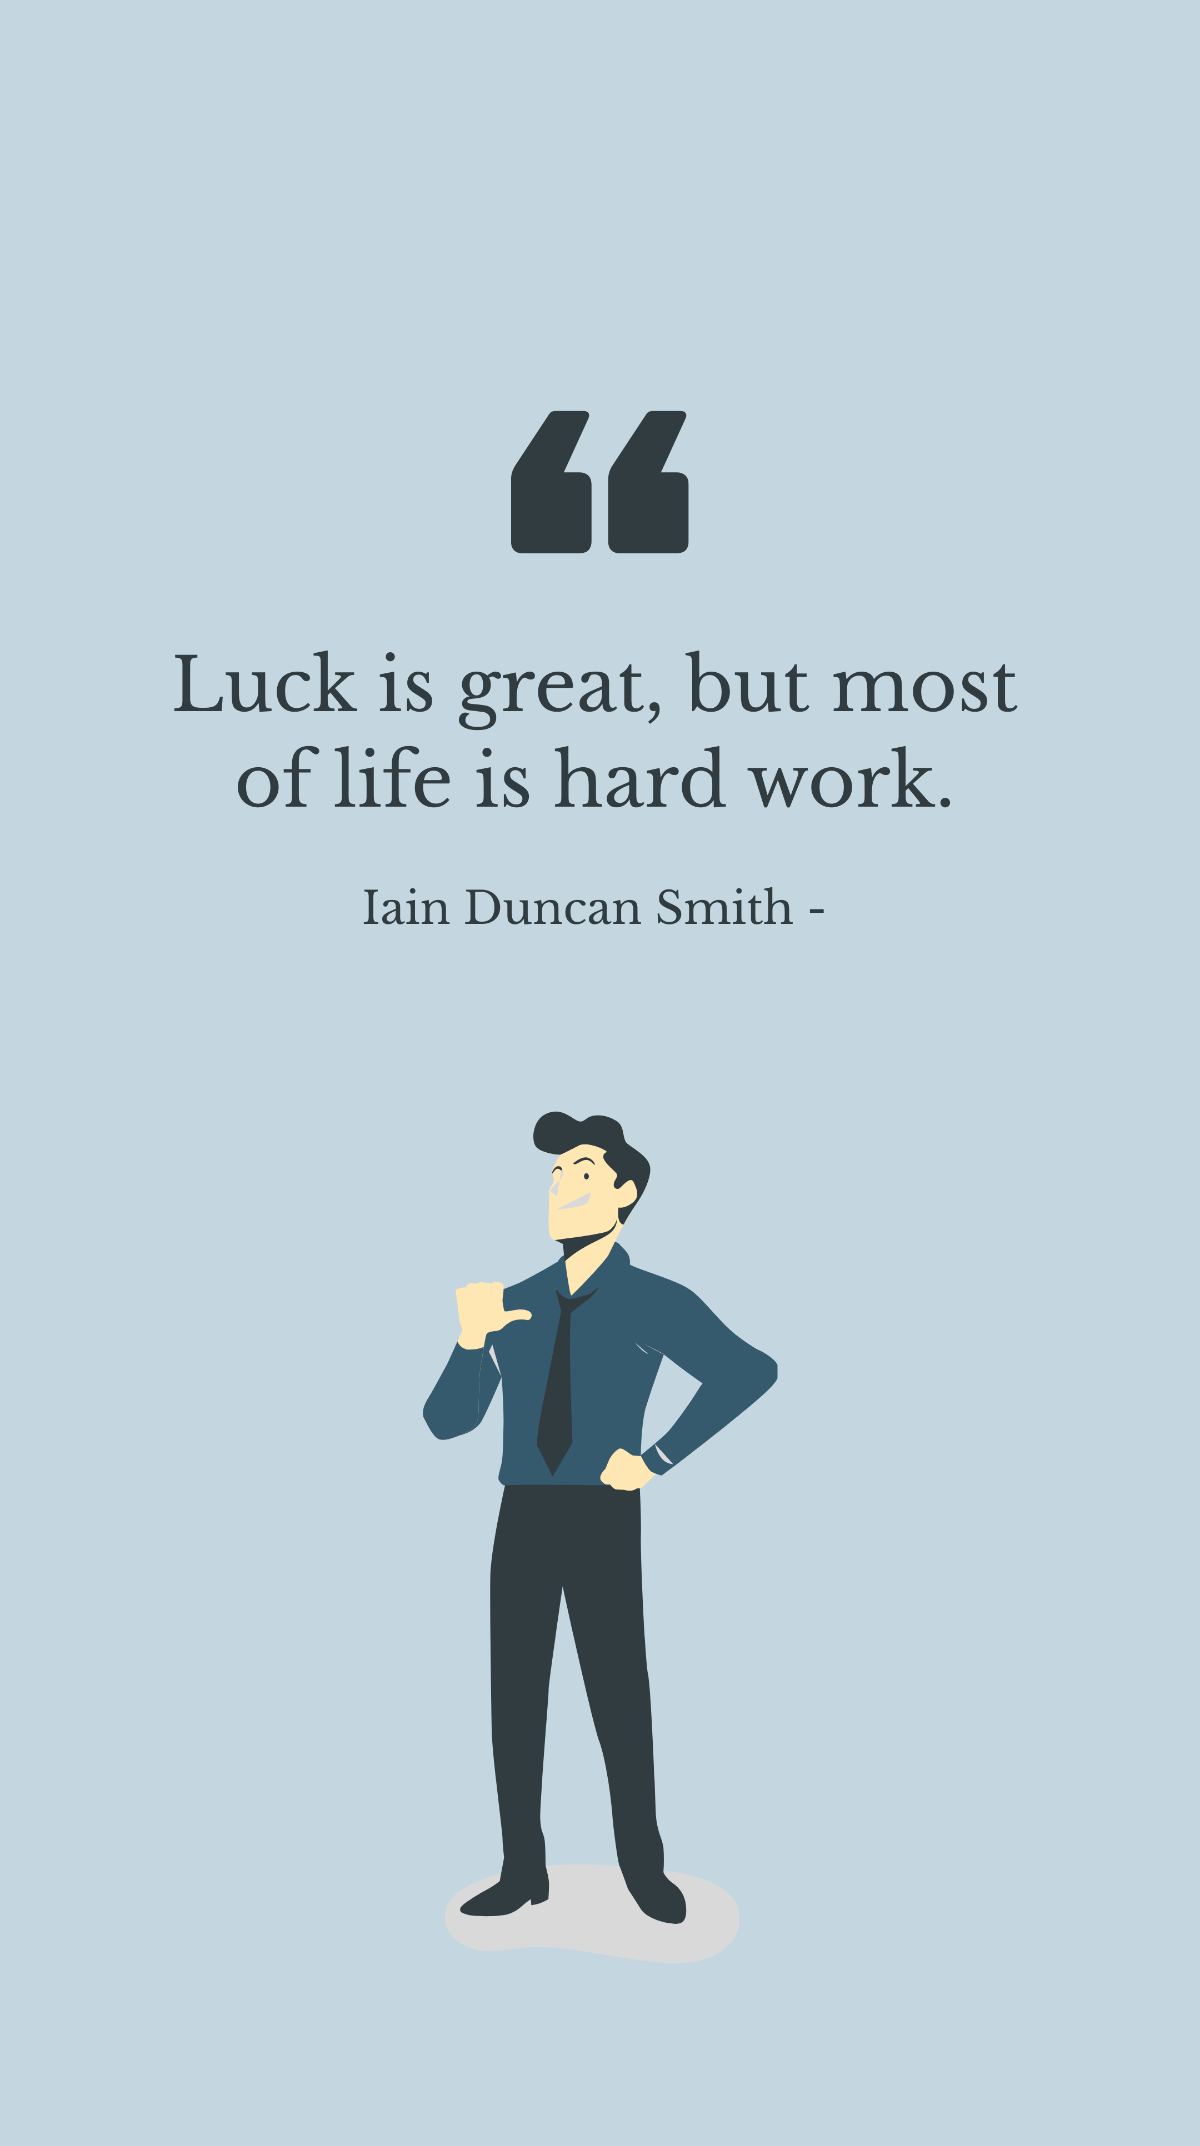 Iain Duncan Smith - Luck is great, but most of life is hard work. Template